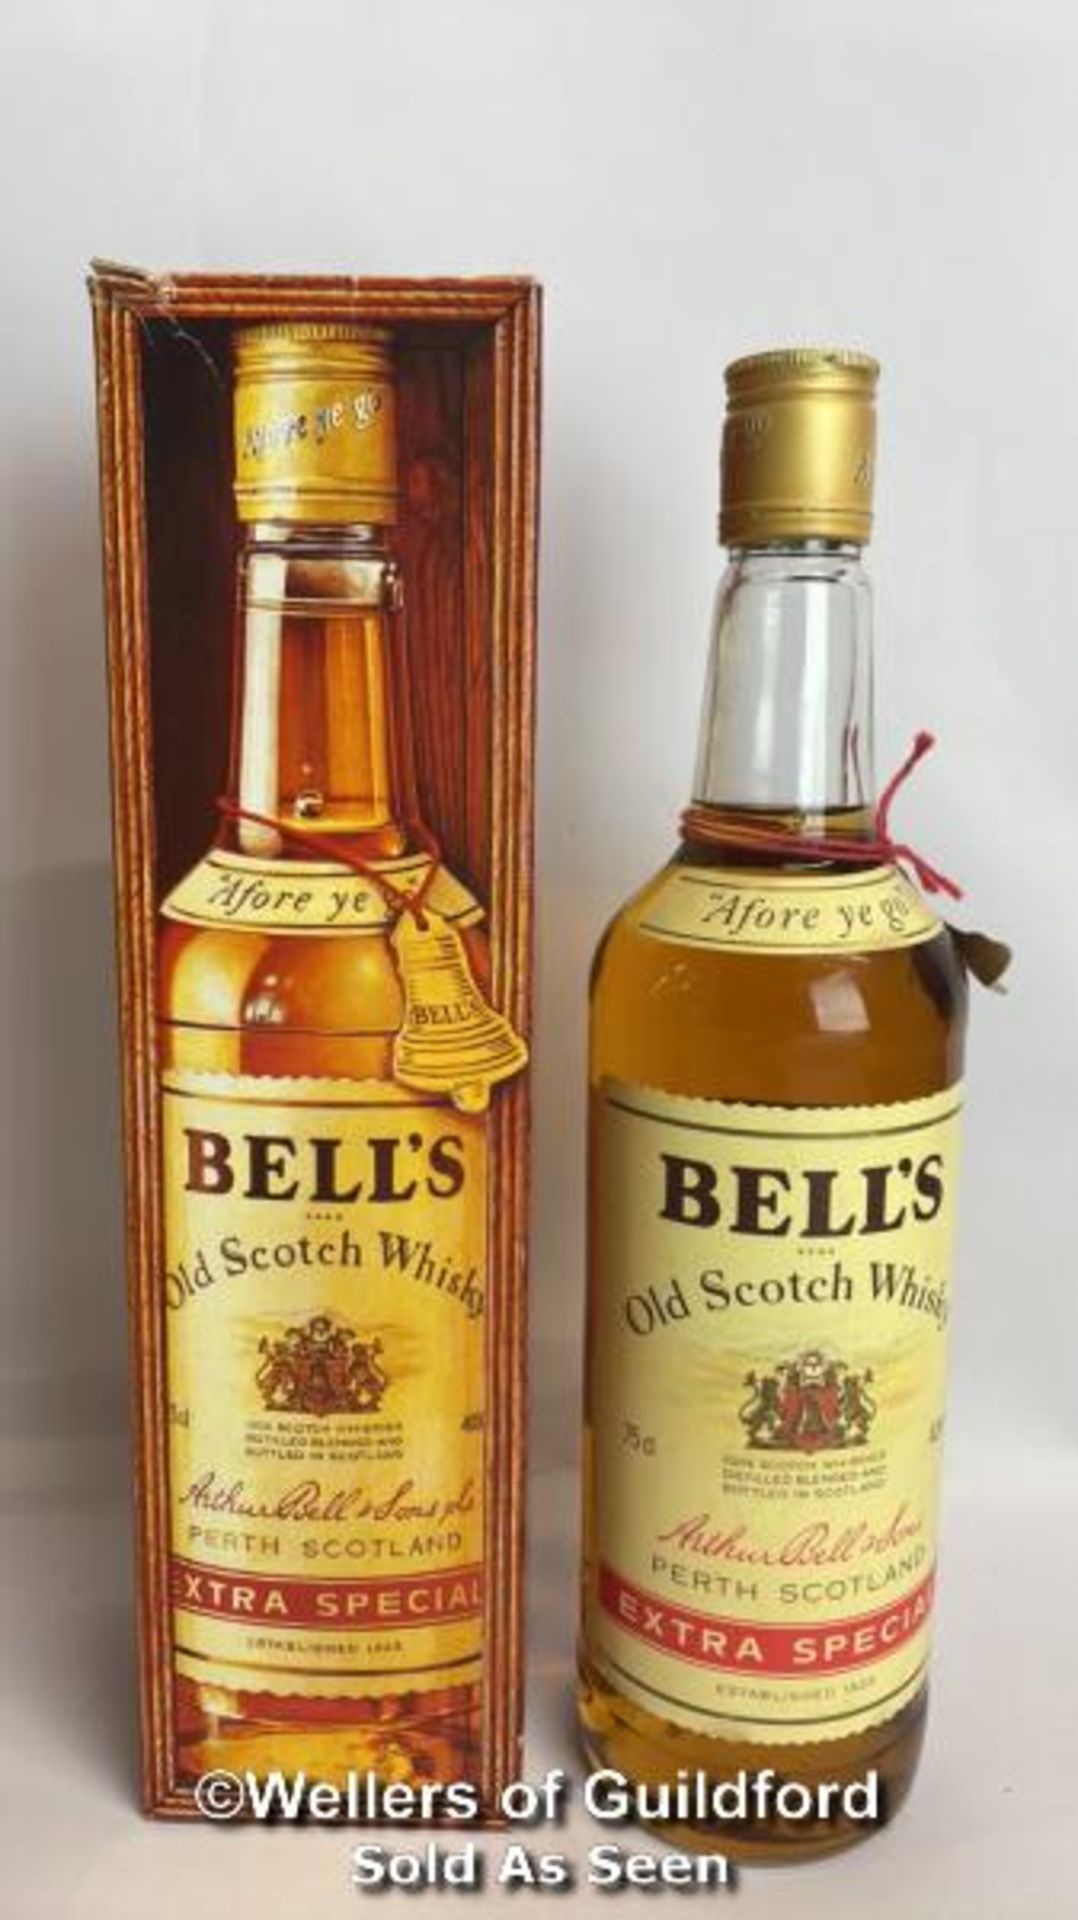 Bell's Extra Special Old Scotch Whisky, "Afore Ye Go", 75cl, 43% vol, In original box / Please see - Image 2 of 12